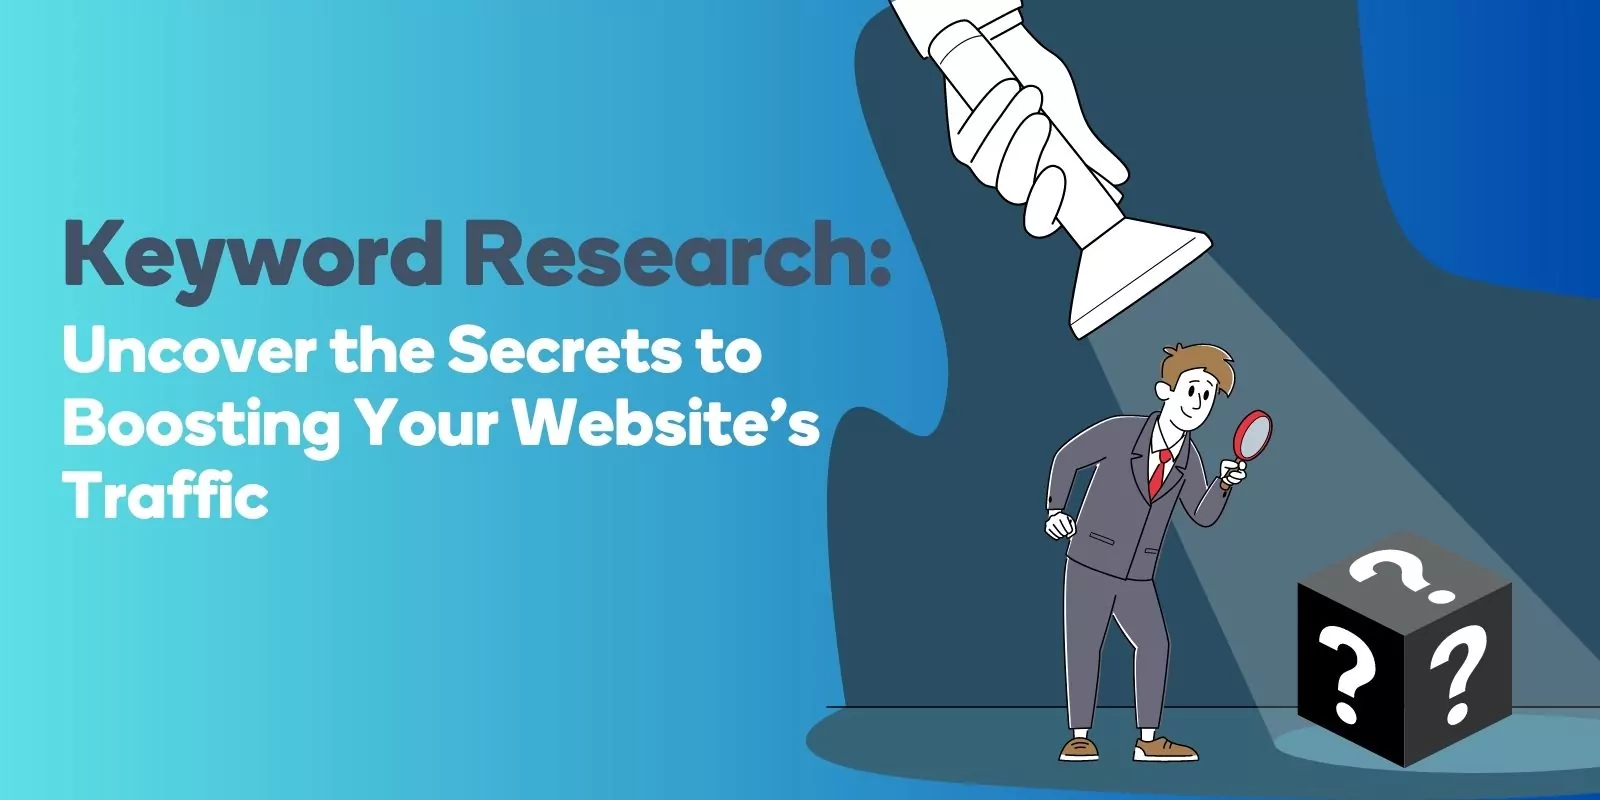 Keyword Research: Uncover the Secrets to Boosting Your Website’s Traffic